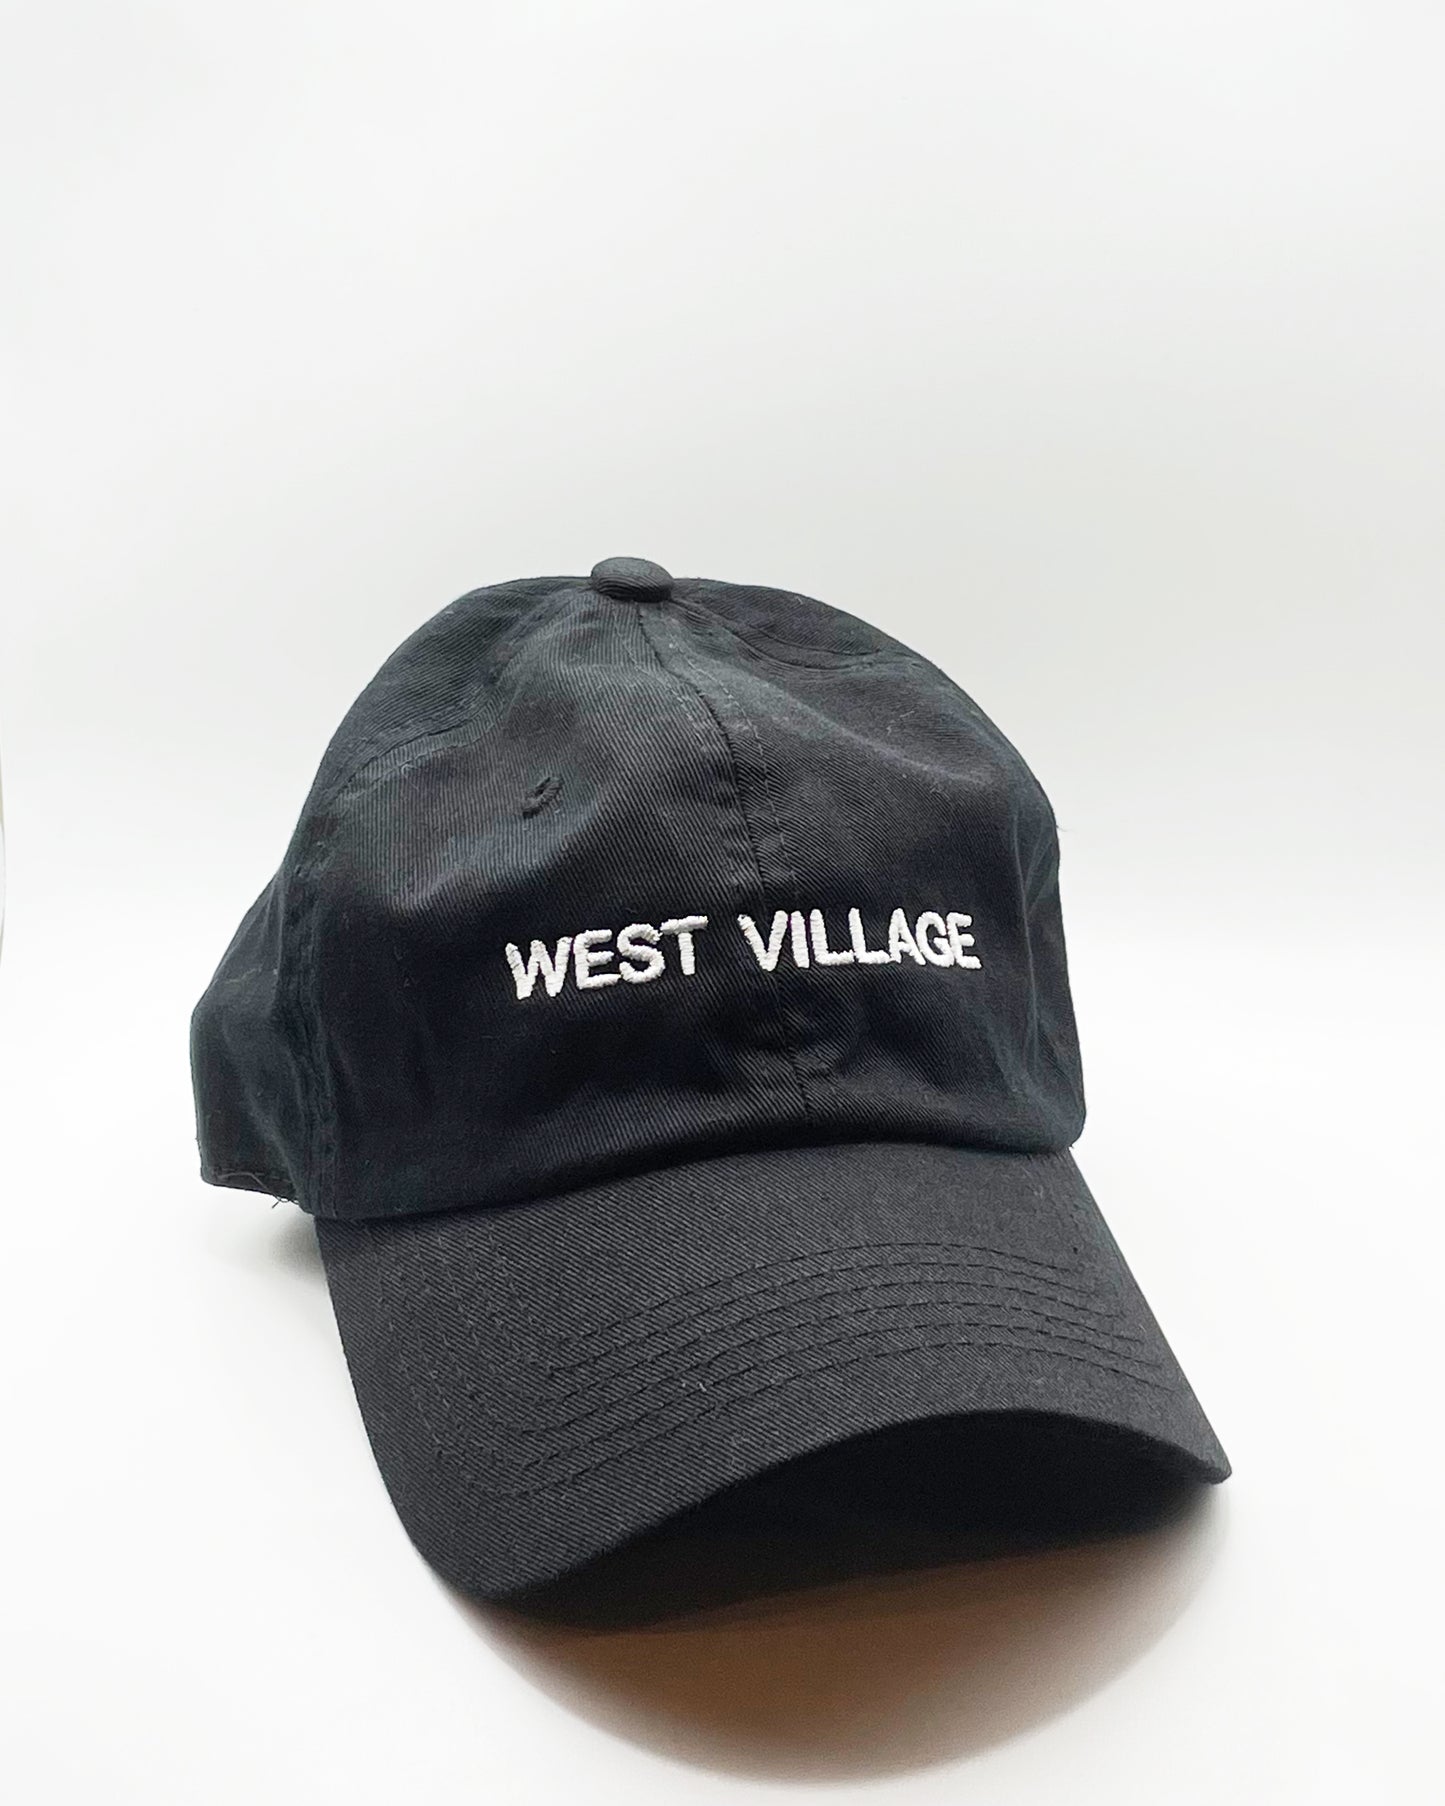 INTENTIONALLY BLANK Slogan Cap in "West Village" available at Lahn.shop